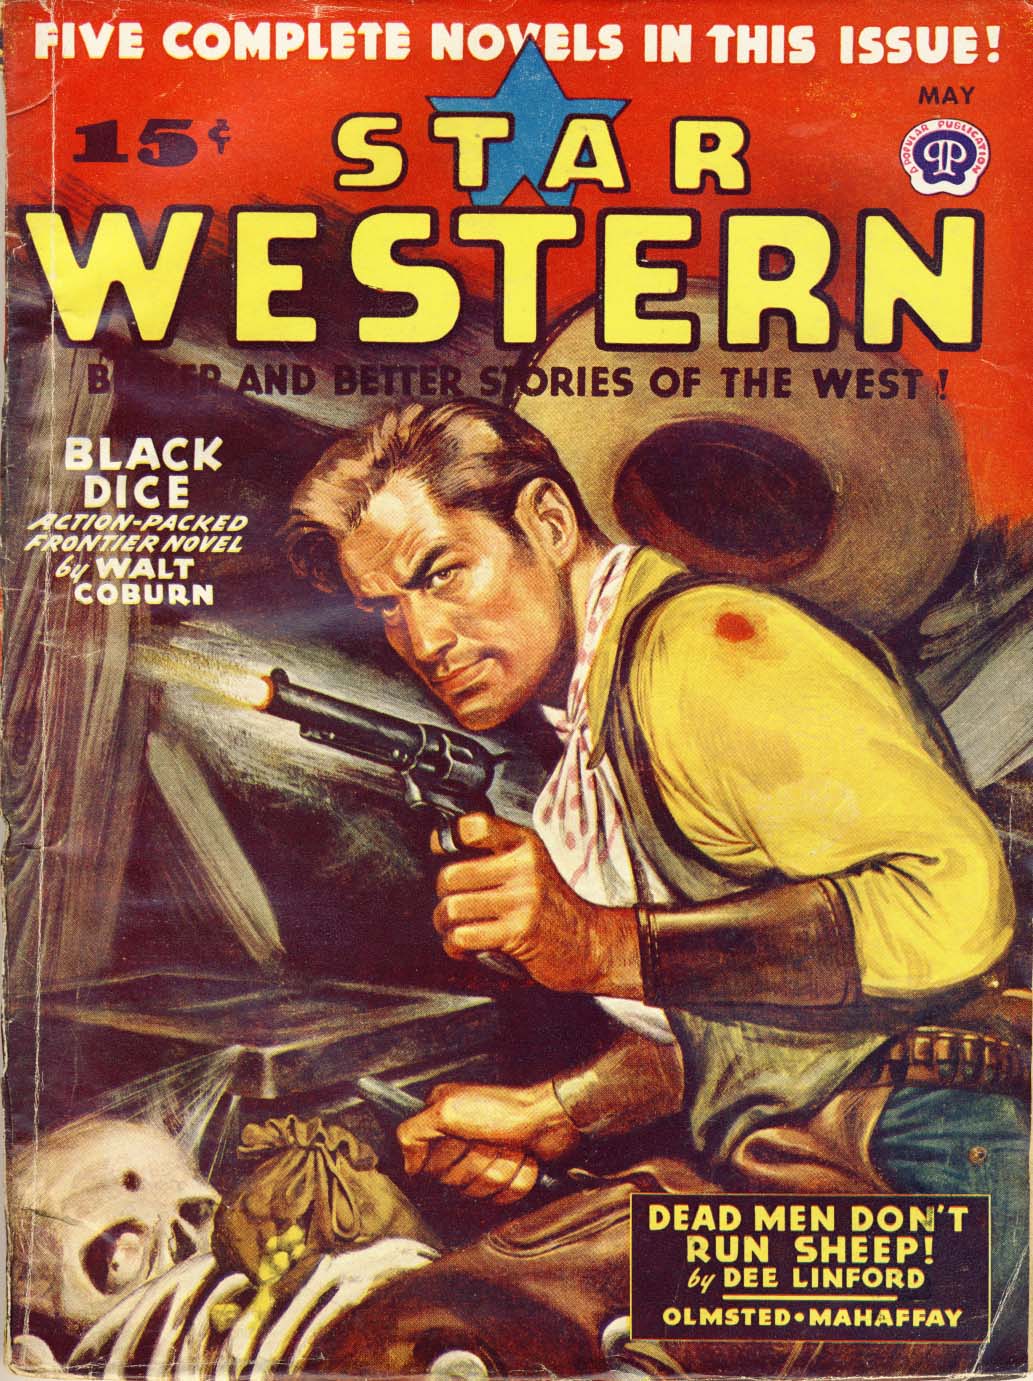 Star Western, v.38, n.4, May 1946 cover